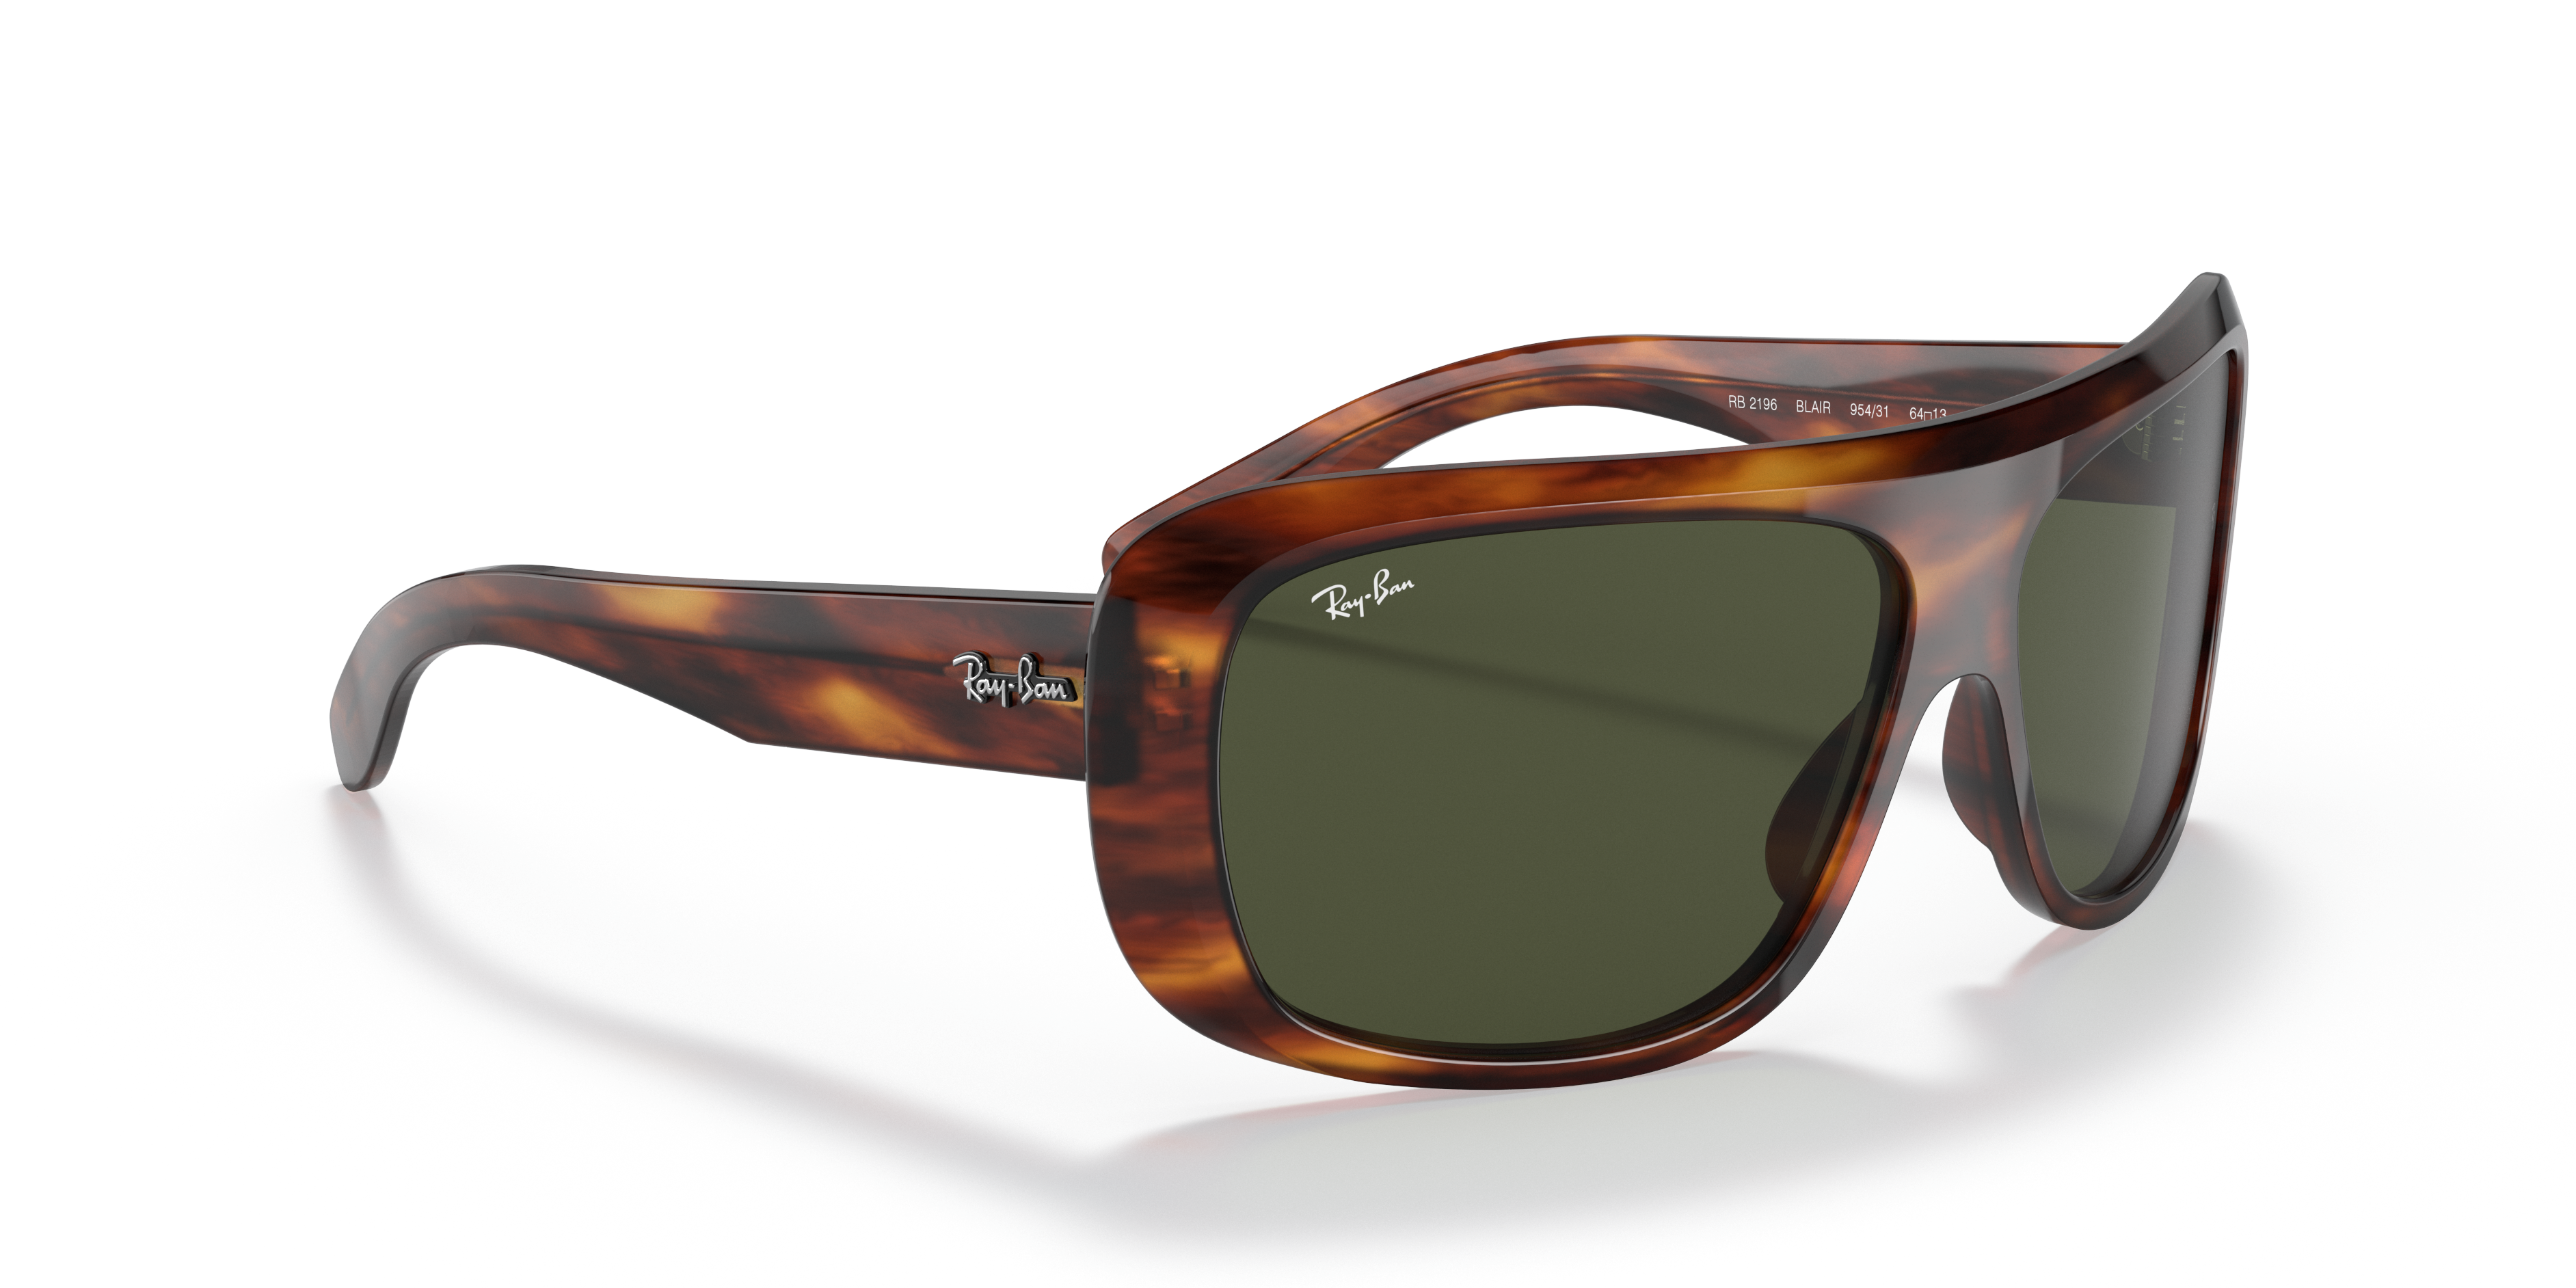 Blair Sunglasses in Striped Havana and Green | Ray-Ban®